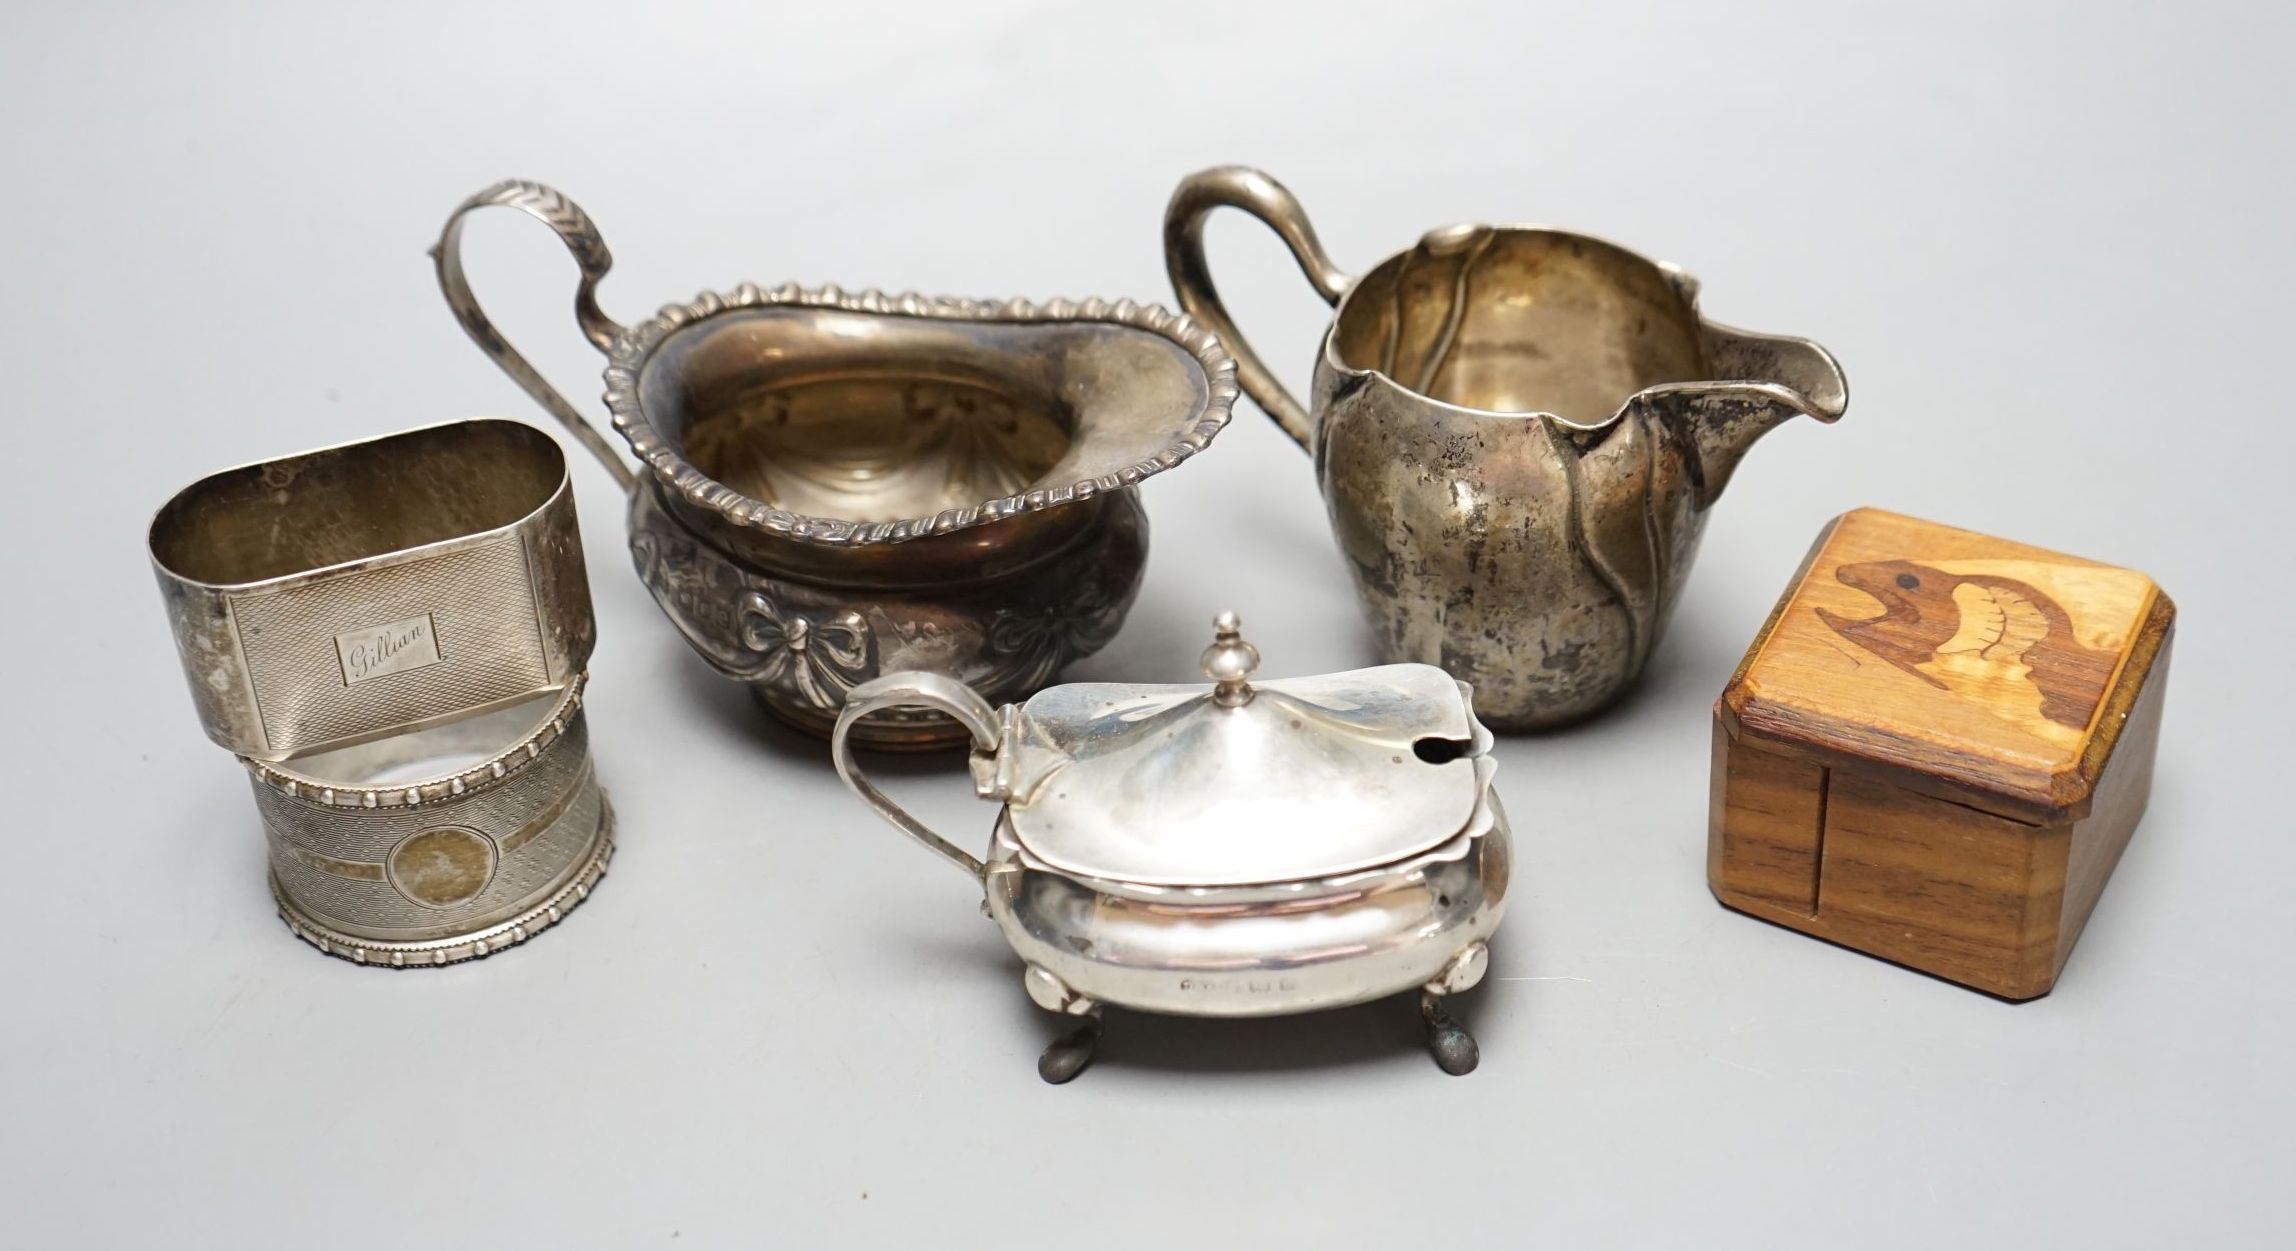 A late Victorian silver cream jug, London, 1900, a German 800 cream jug, a silver mustard pot, two silver napkin rings, a silver lid and a wooden box